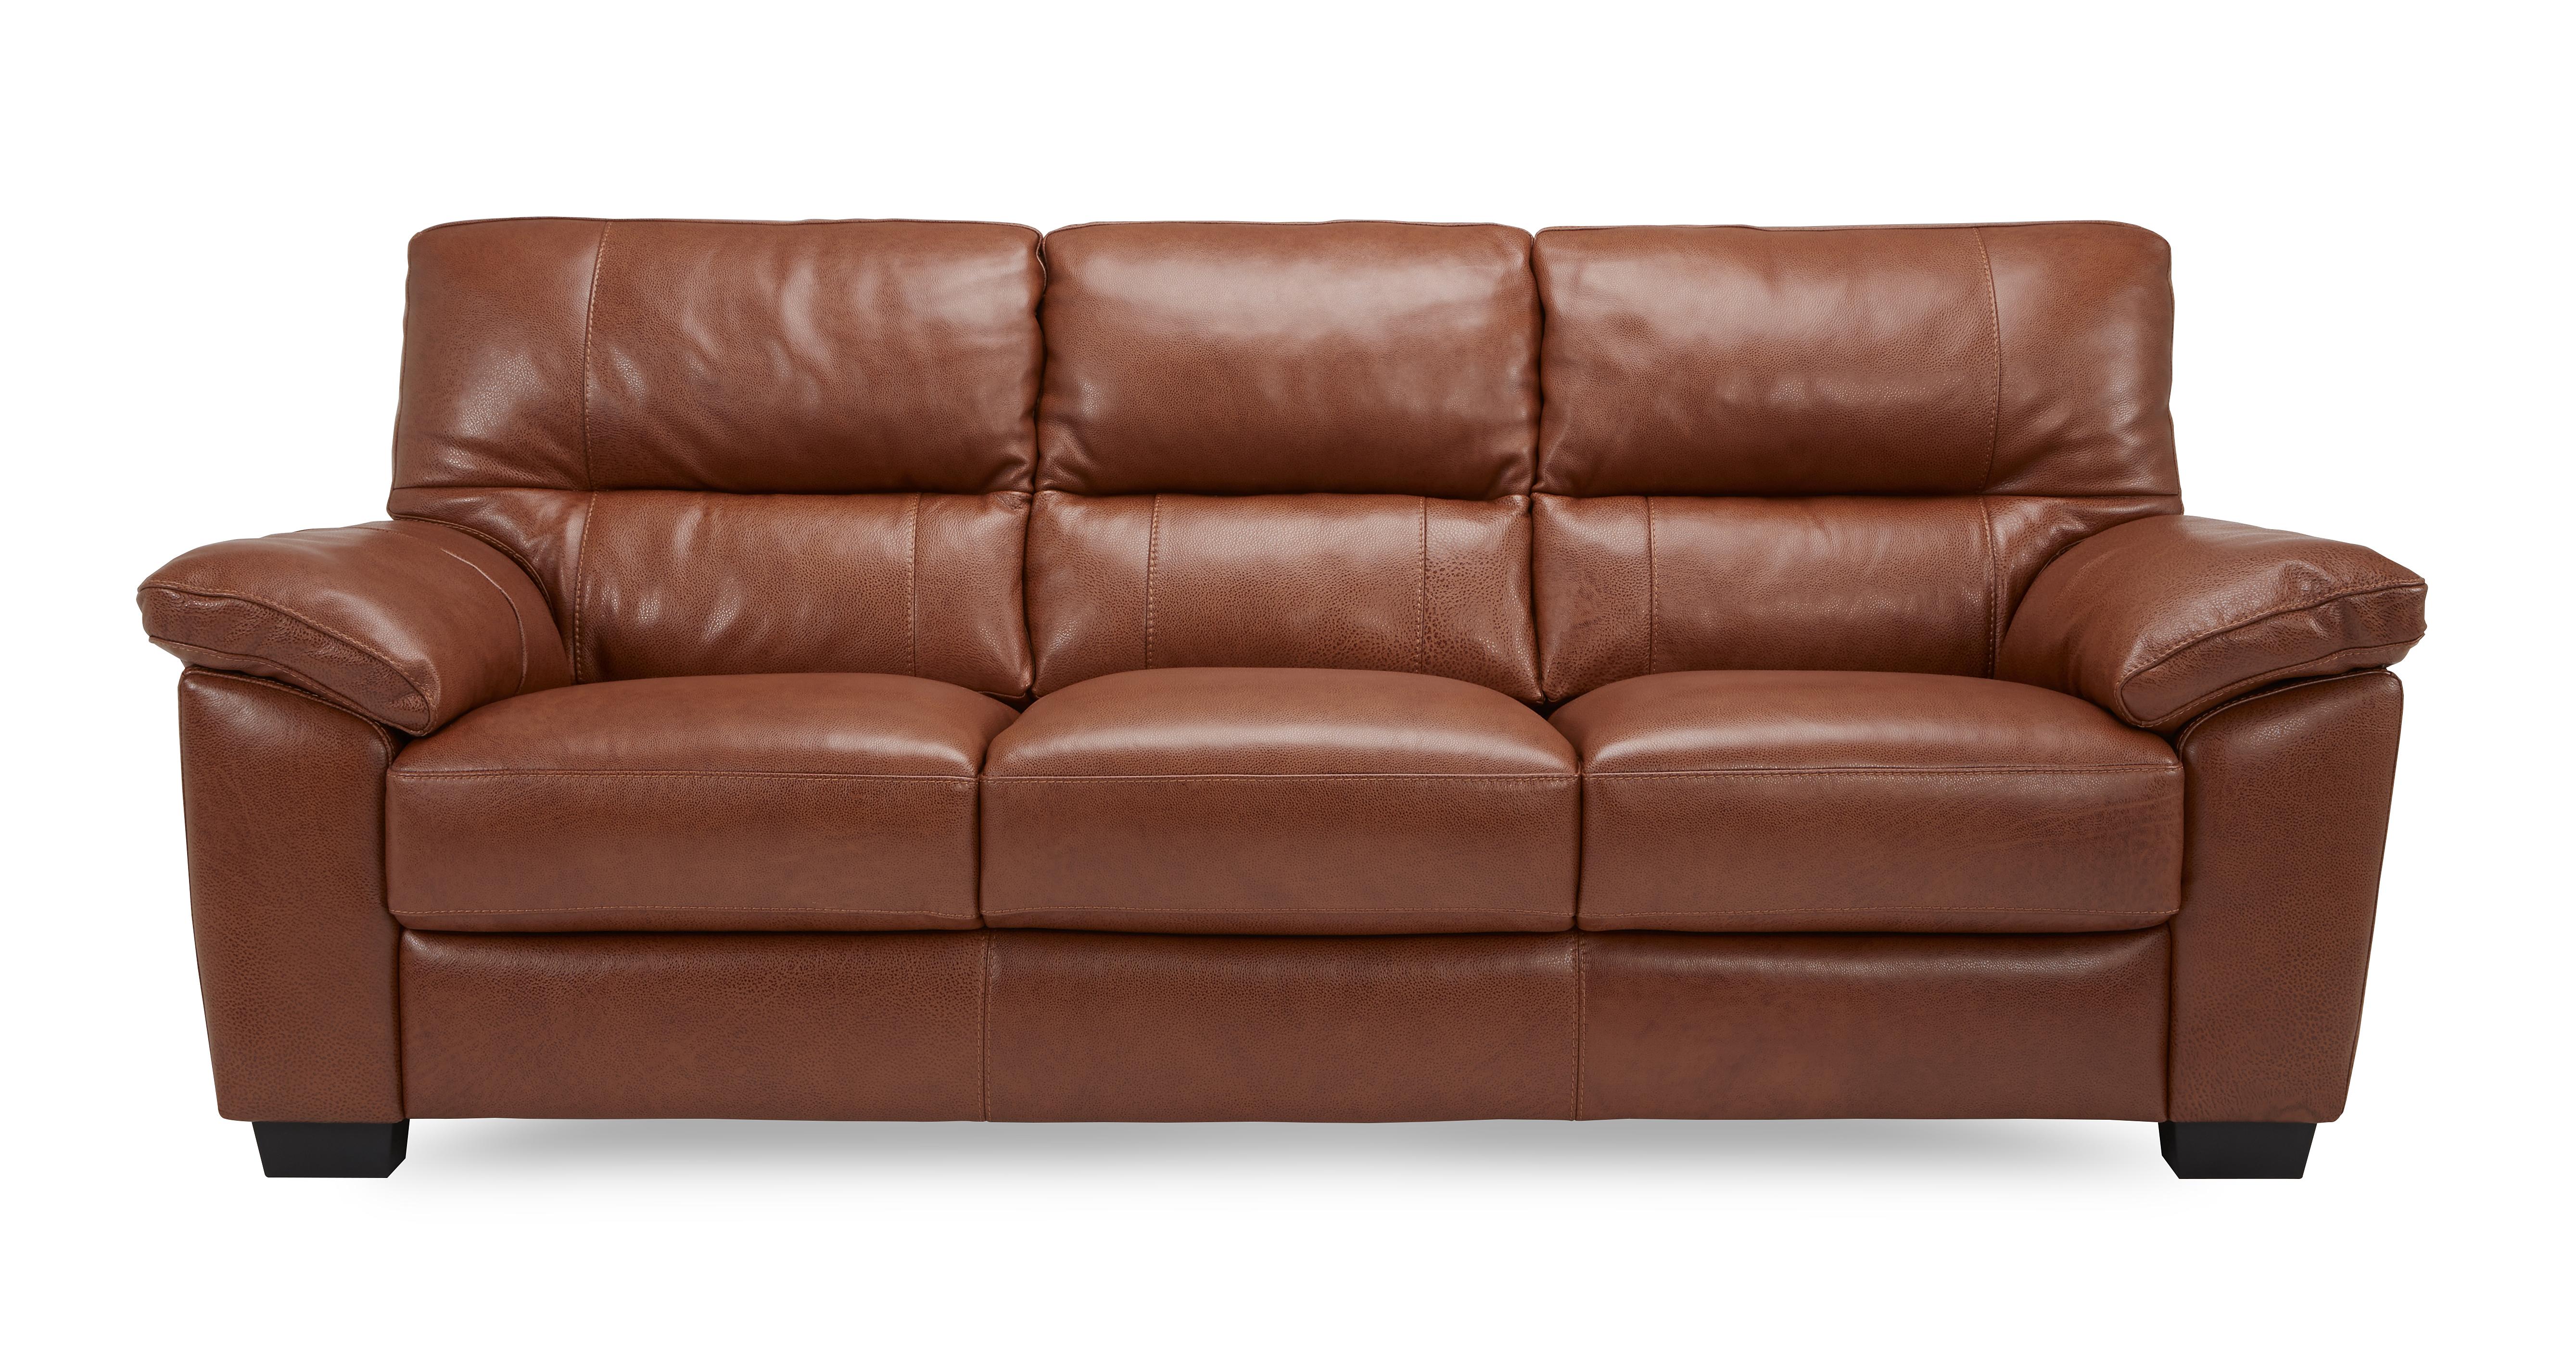 dfs 3 seater leather sofa